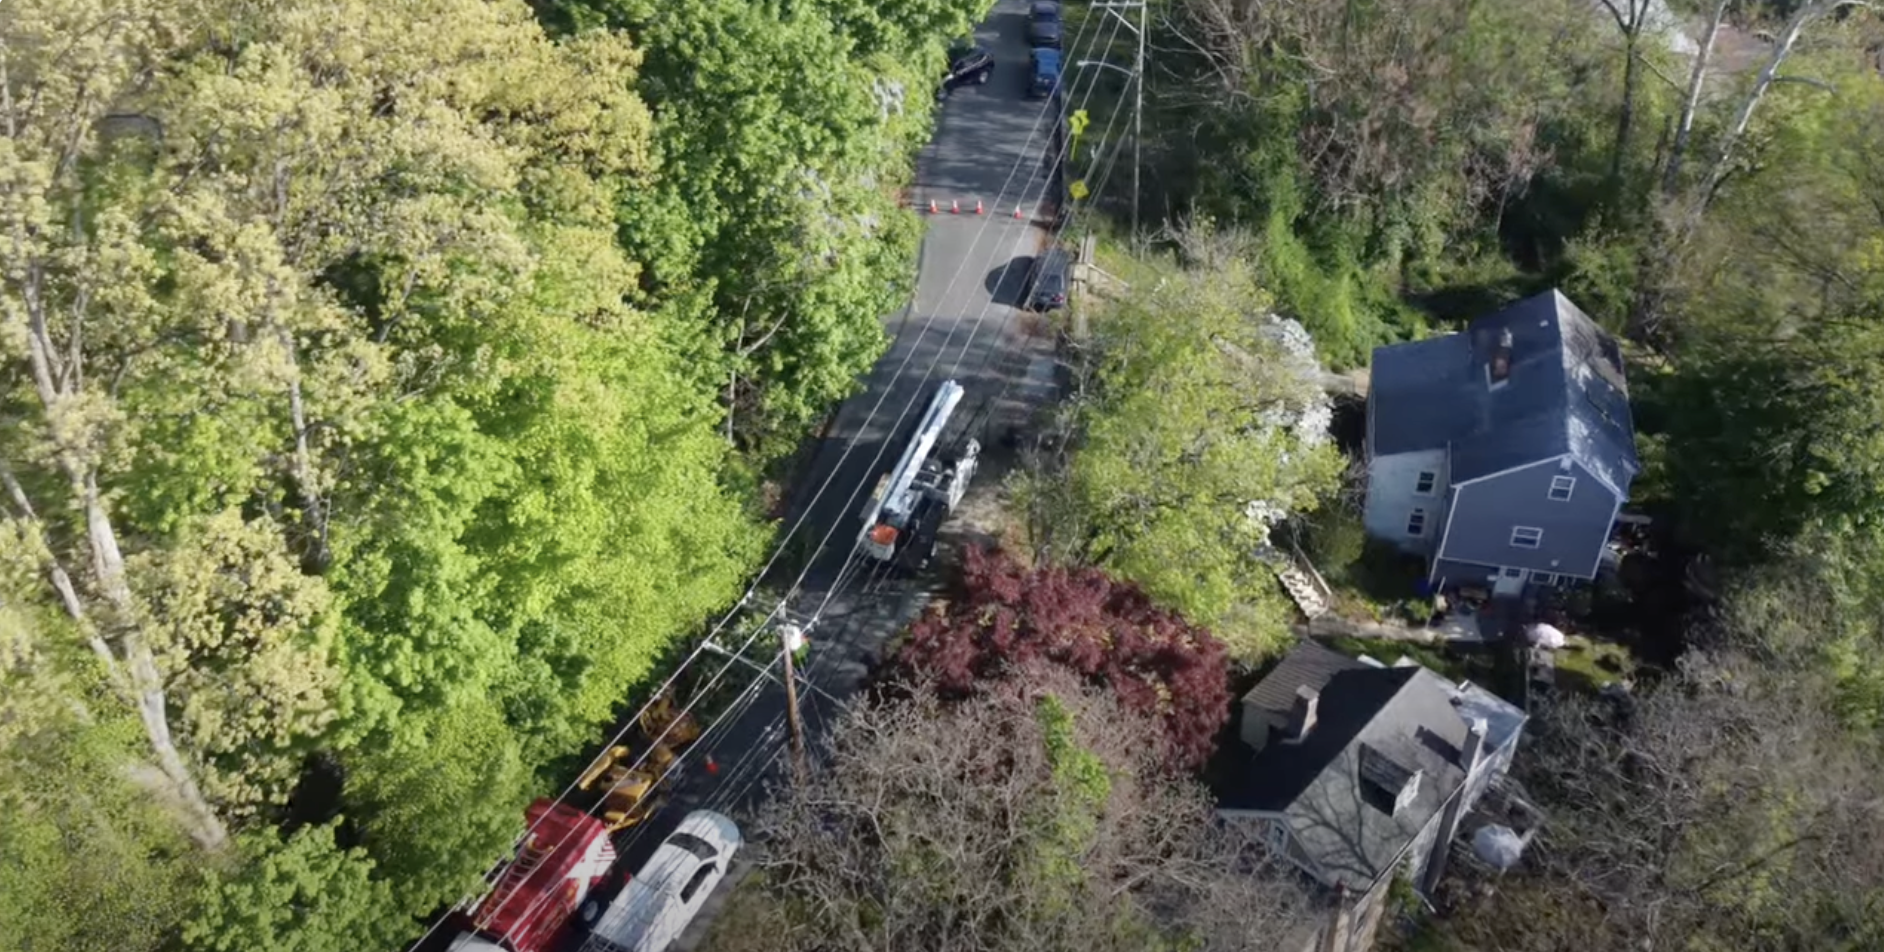 Executive Tree Care Tackles Major Tree Removal Project